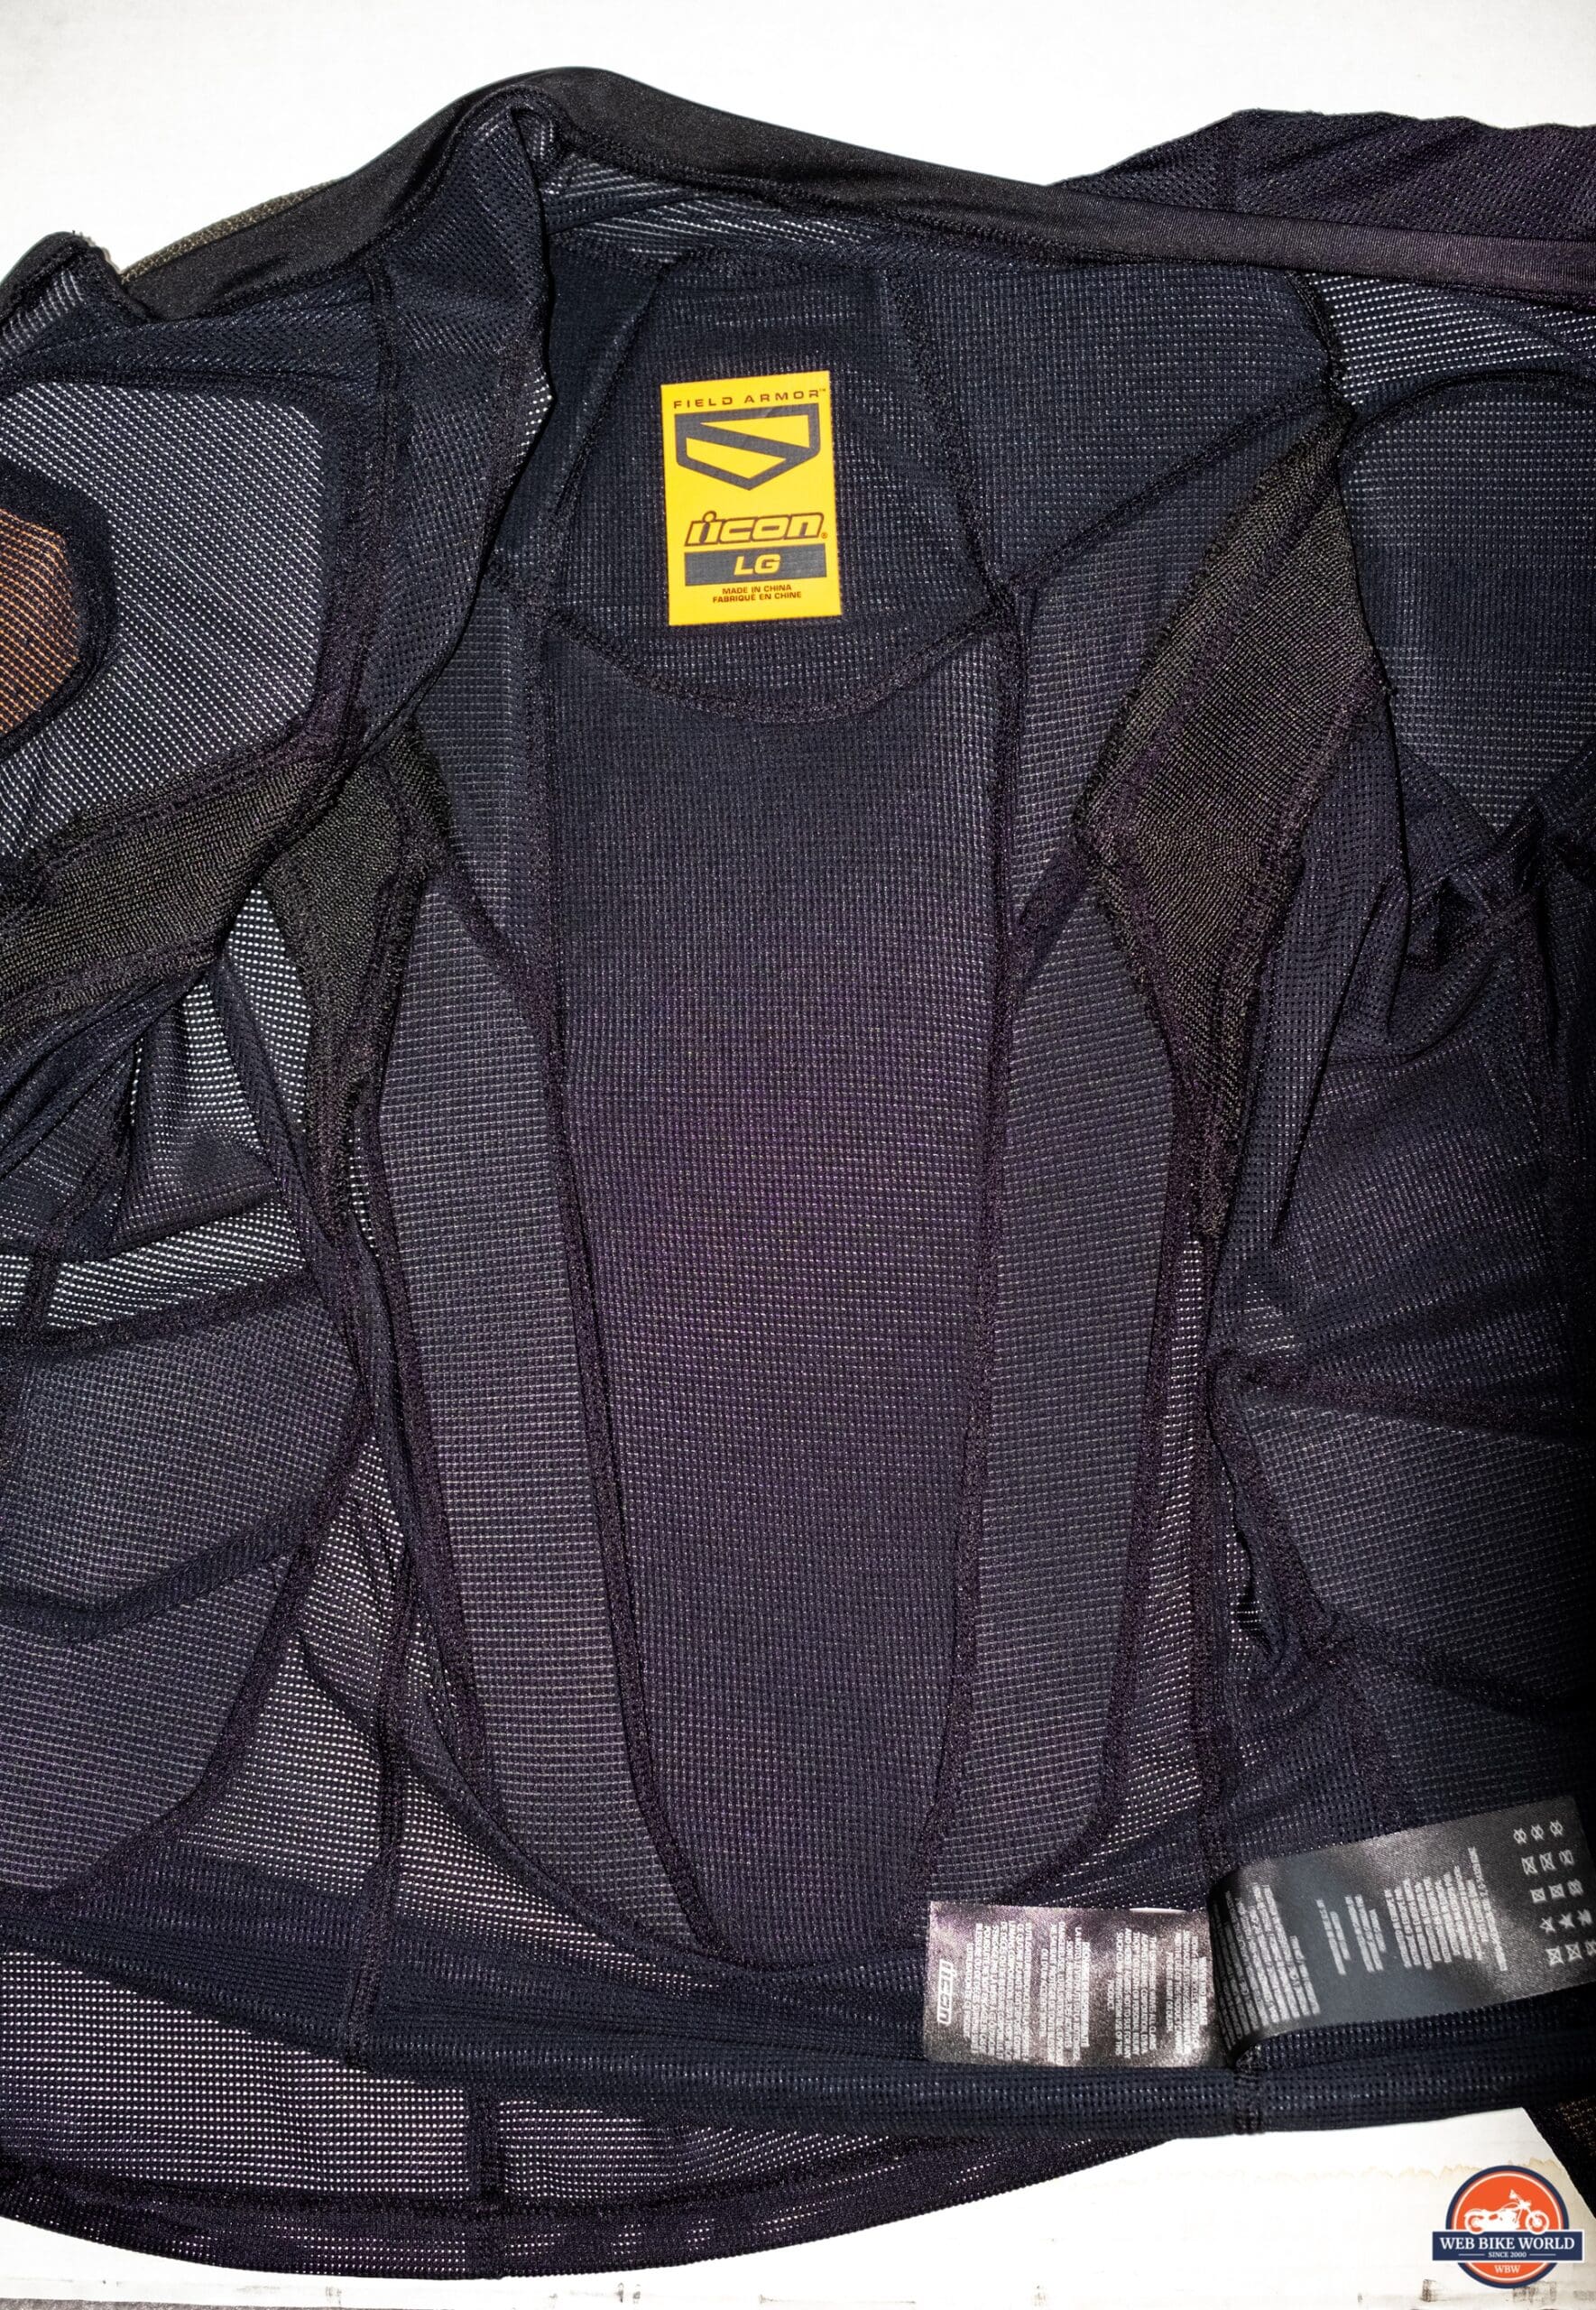 Icon Field Armor Compression Shirt Review